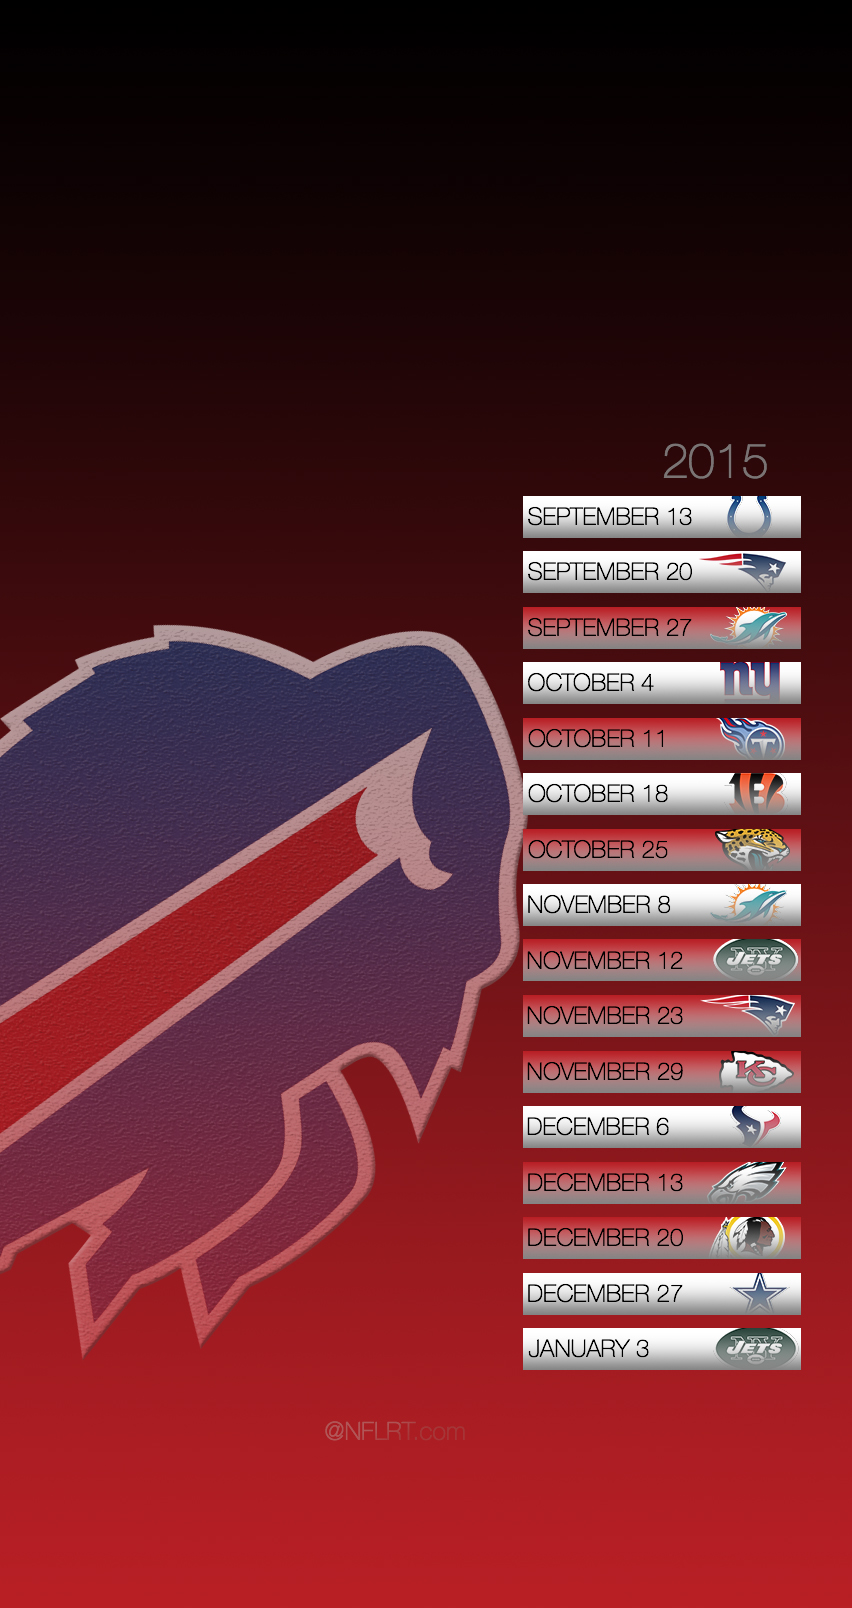 Your Favorite Afc East Division Nfl Football Team The Buffalo Bills